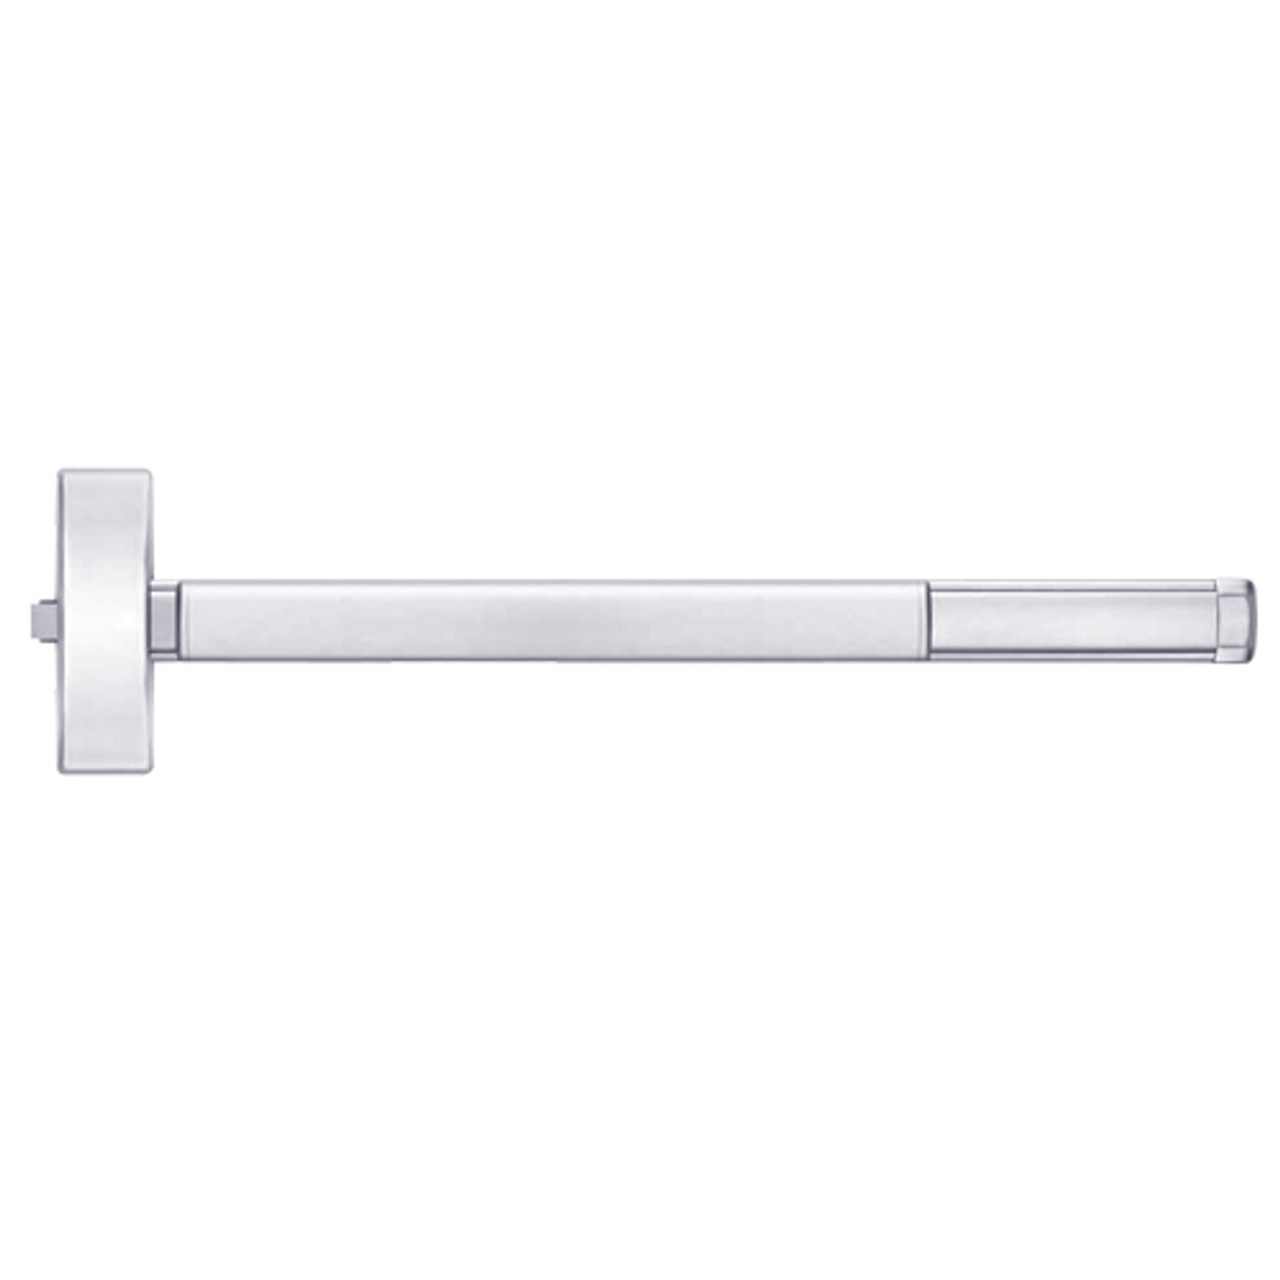 DEFL2103-625-36 PHI 2100 Series Fire Rated Apex Rim Exit Device with Delayed Egress Prepped for Key Retracts Latchbolt in Bright Chrome Finish